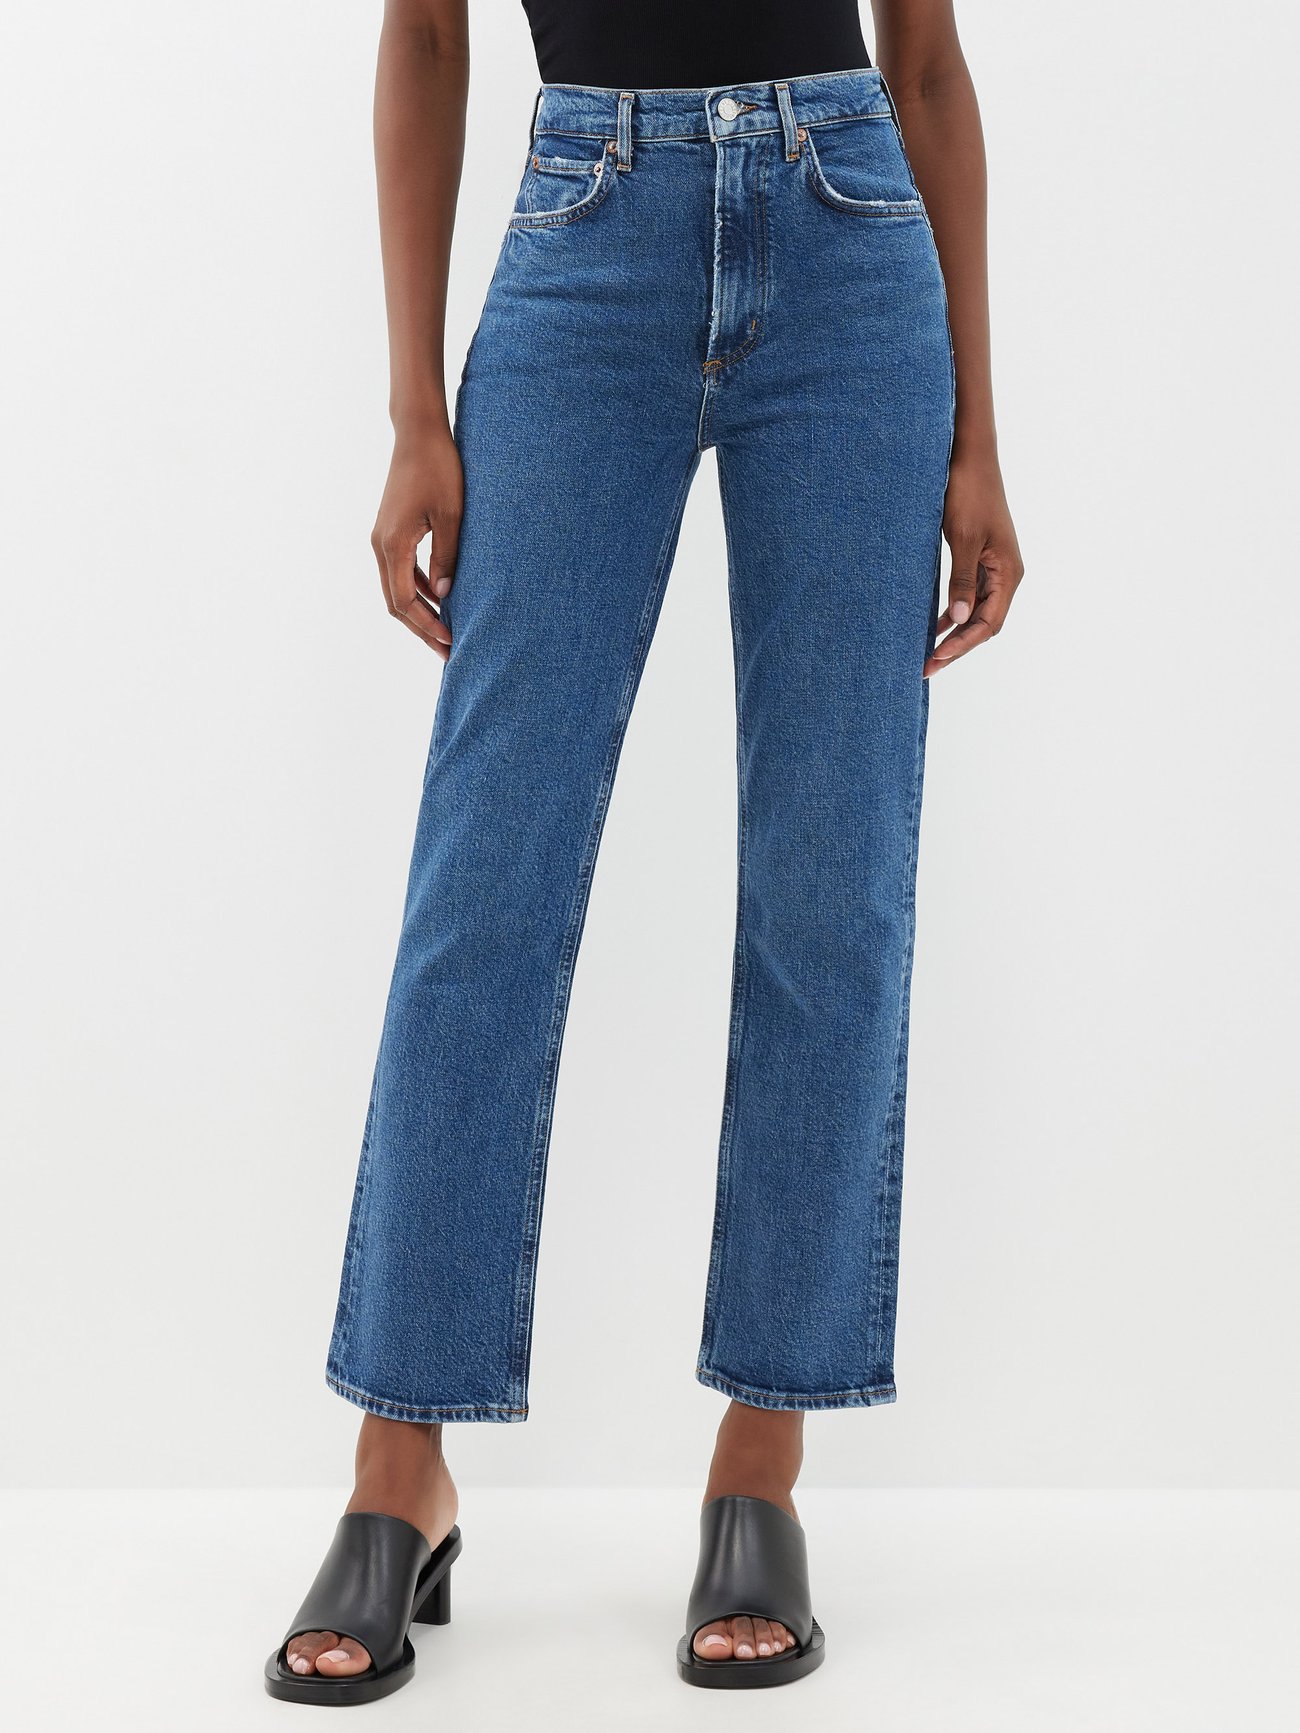 Blue High-rise stovepipe jeans | Agolde | MATCHES UK